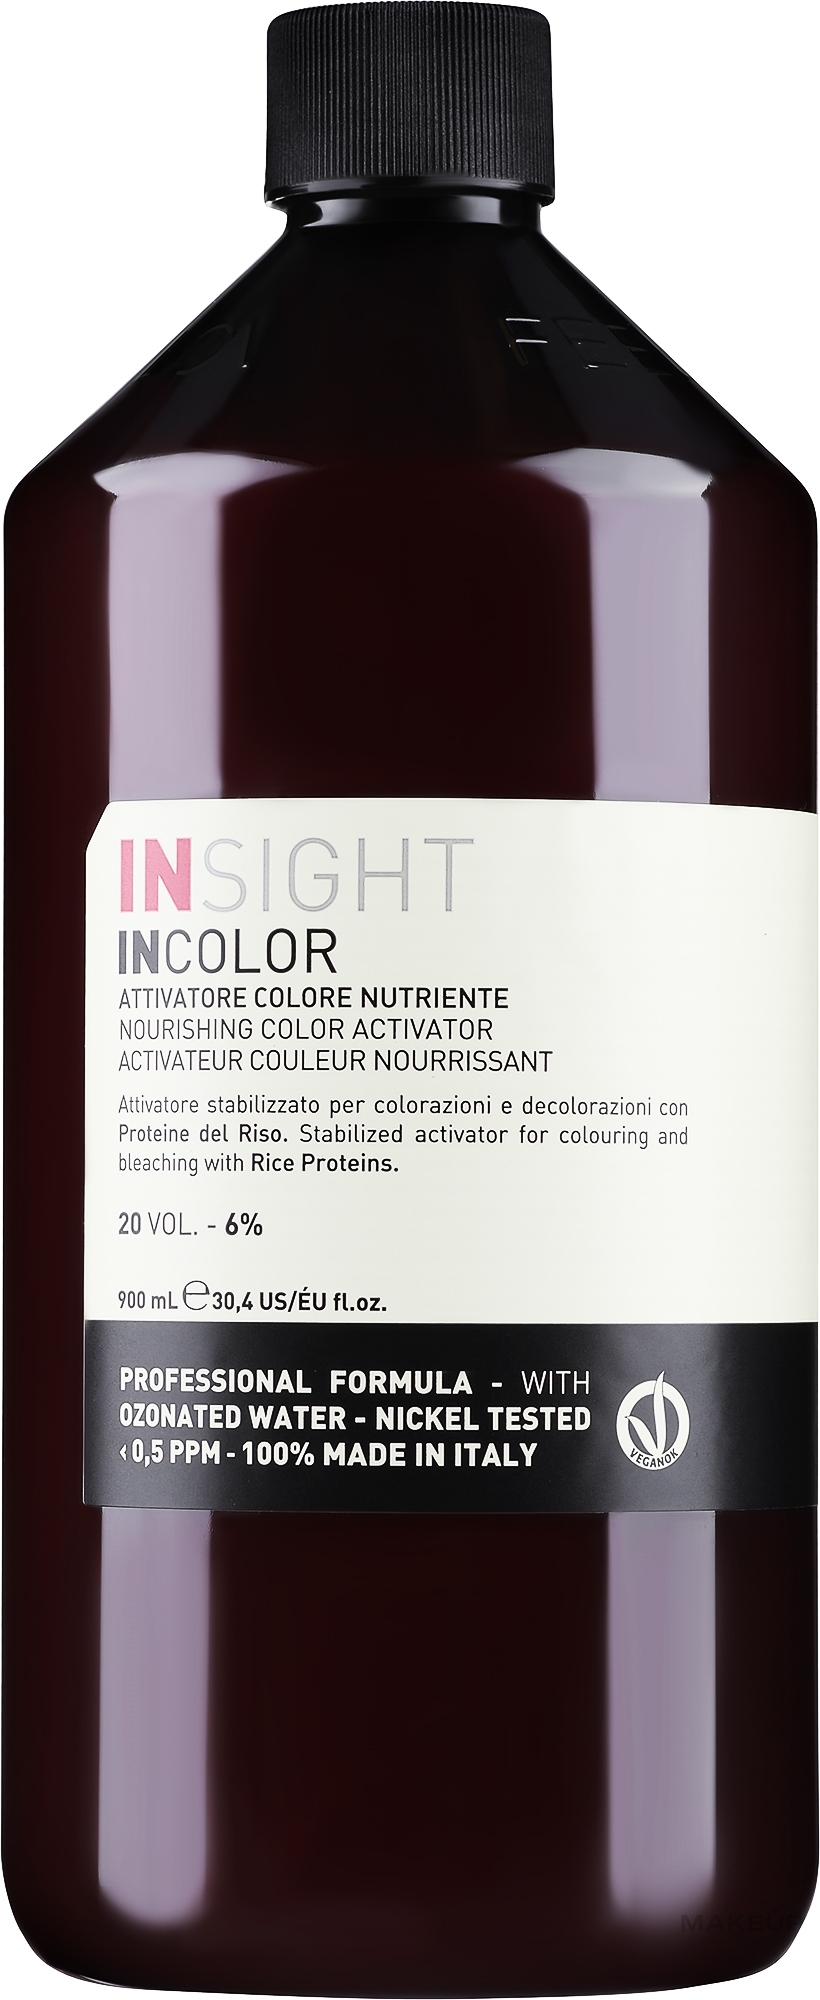 Protein Activator 6% - Insight Incolor Nourishing Color Activator Vol 20 — photo 900 ml